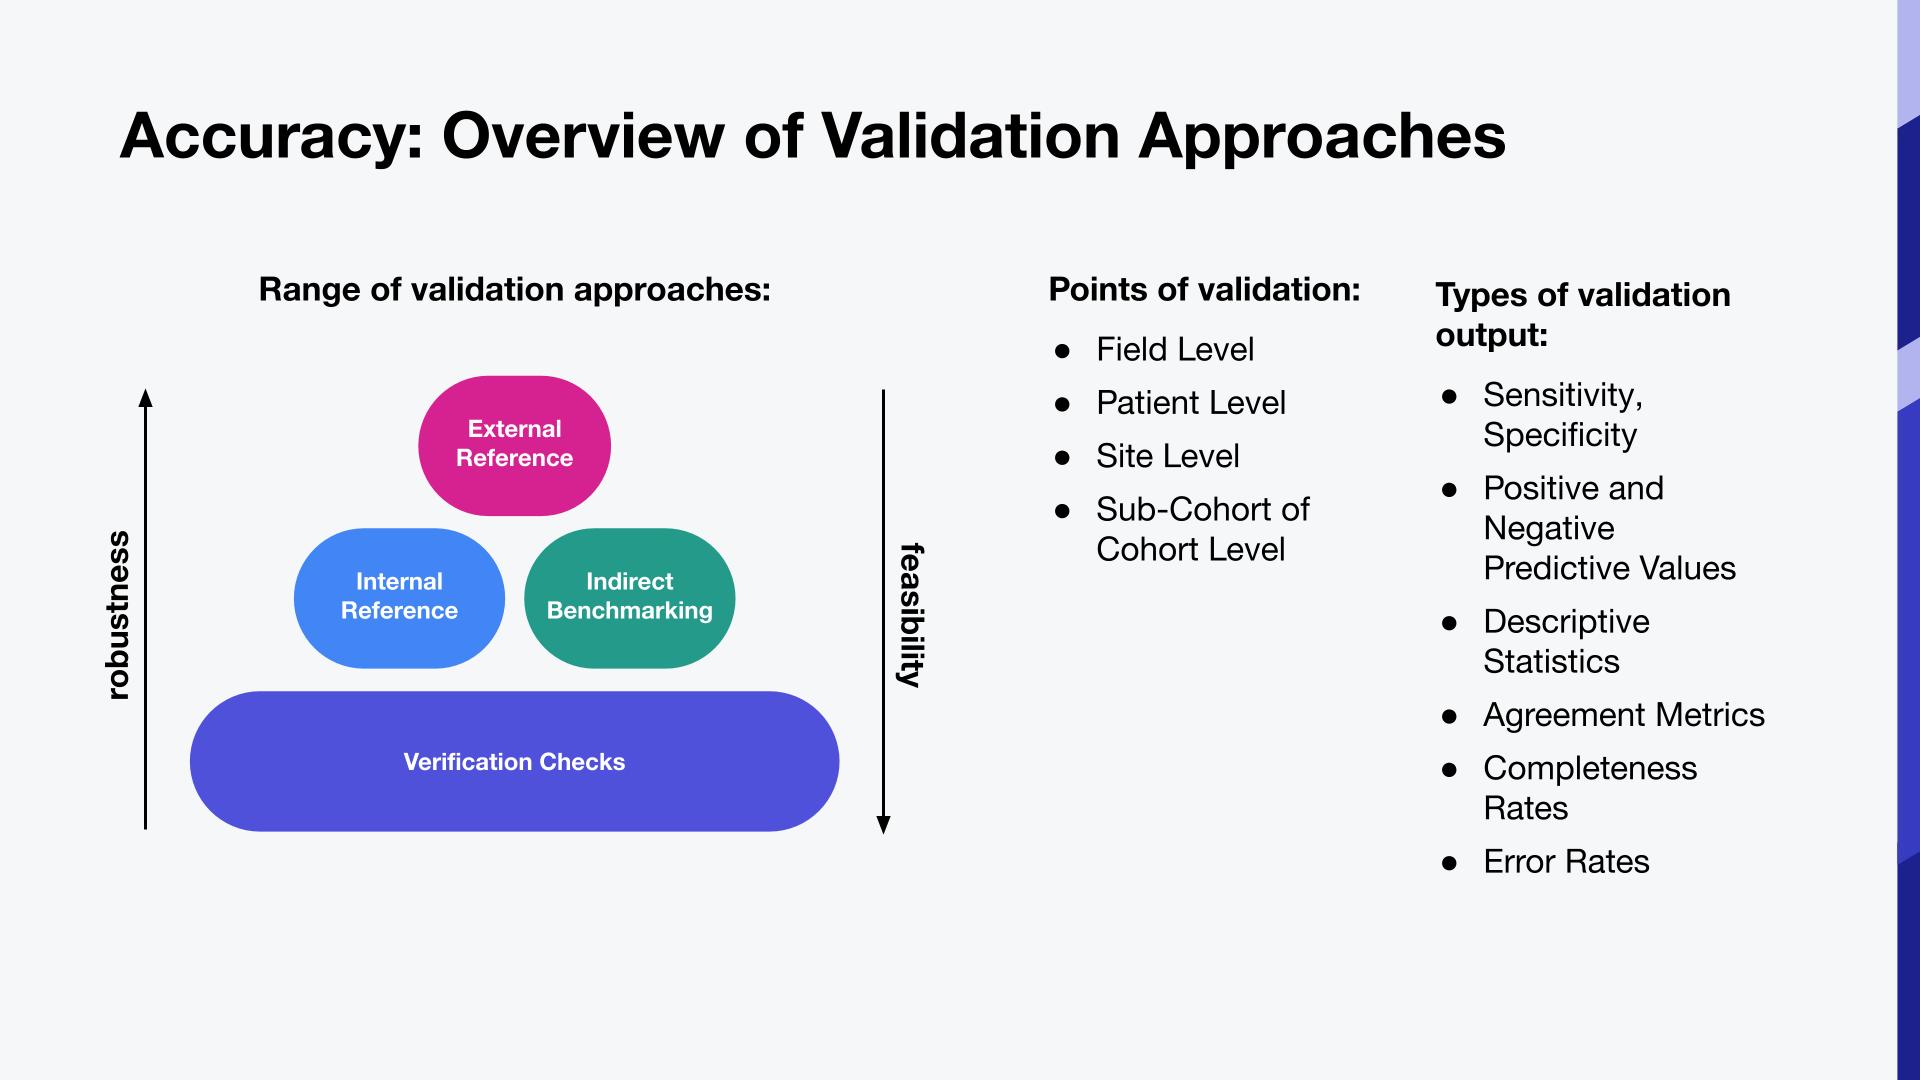 Overview of Validation Approaches